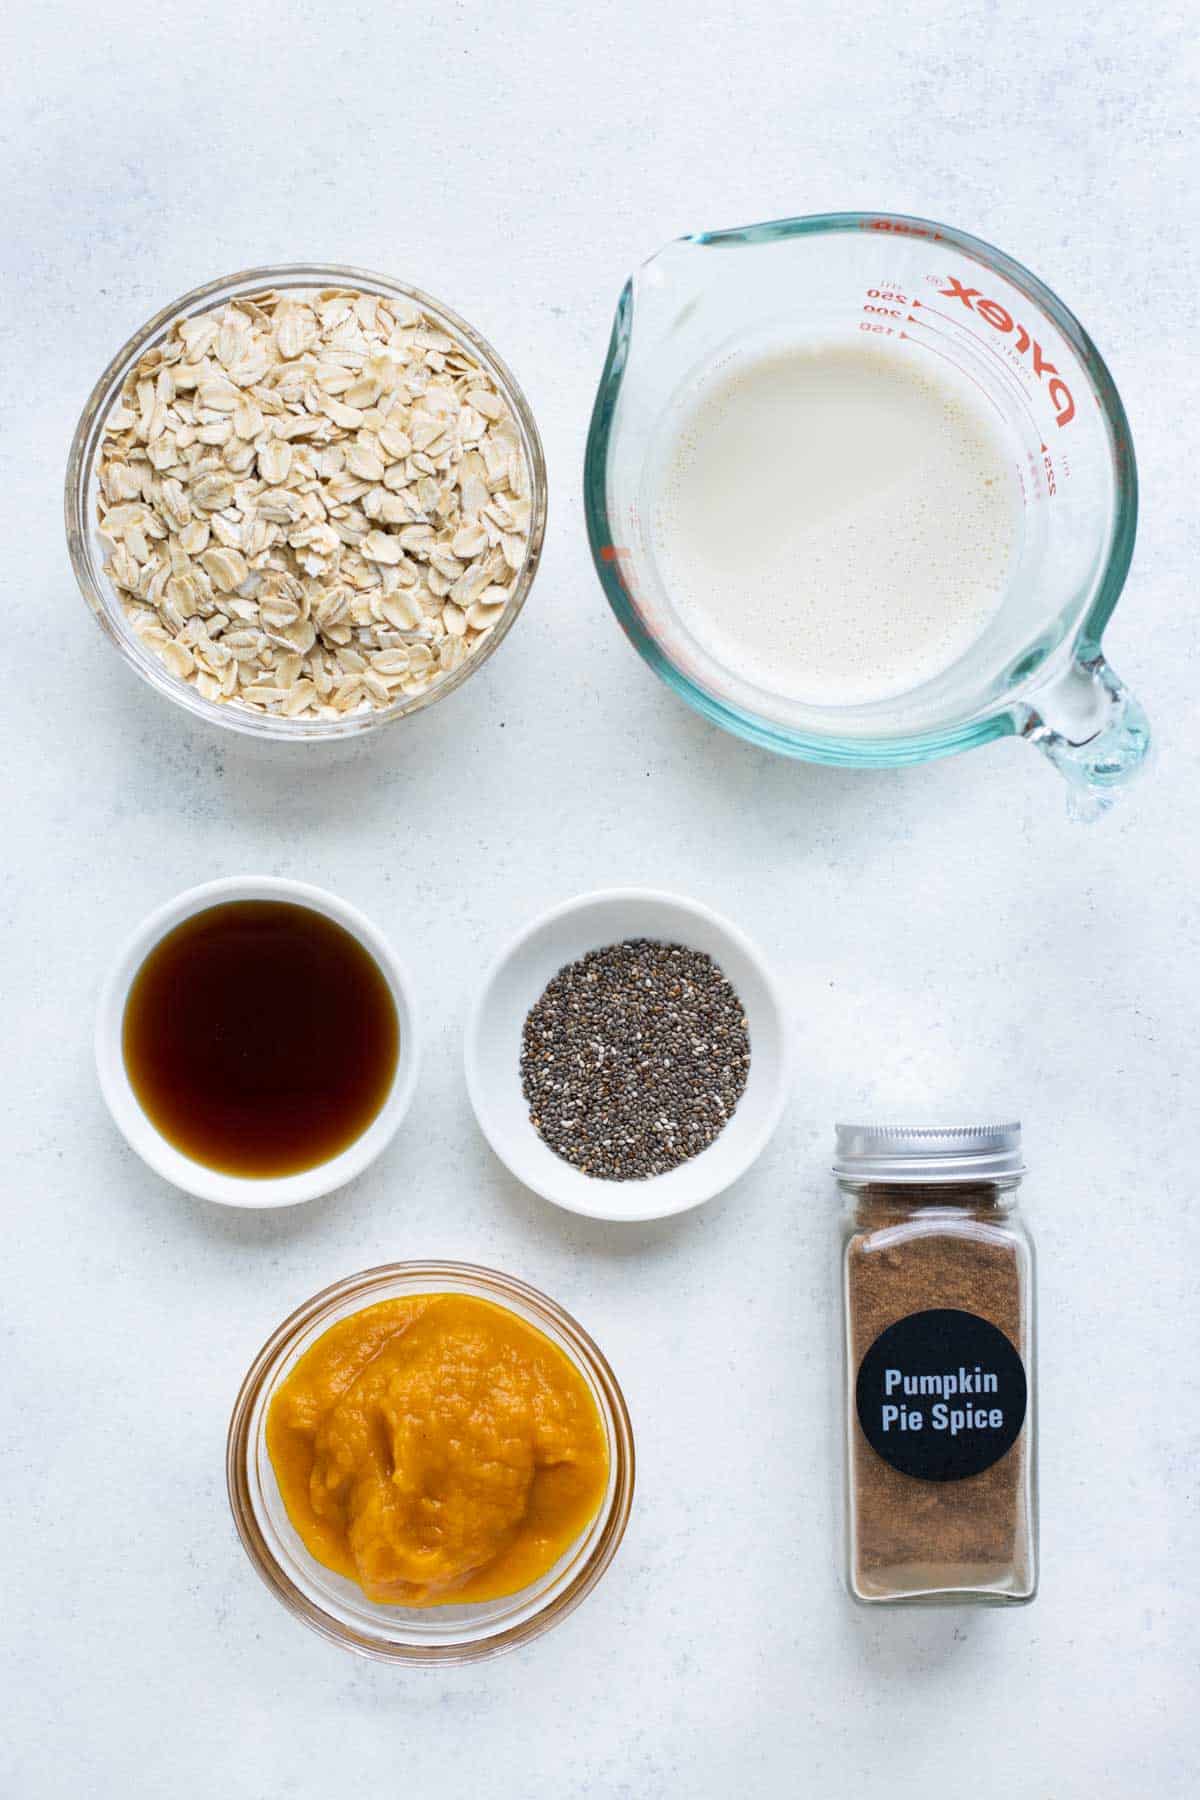 Oats, milk, pumpkin puree, syrup, and spices are the ingredients for this recipe.